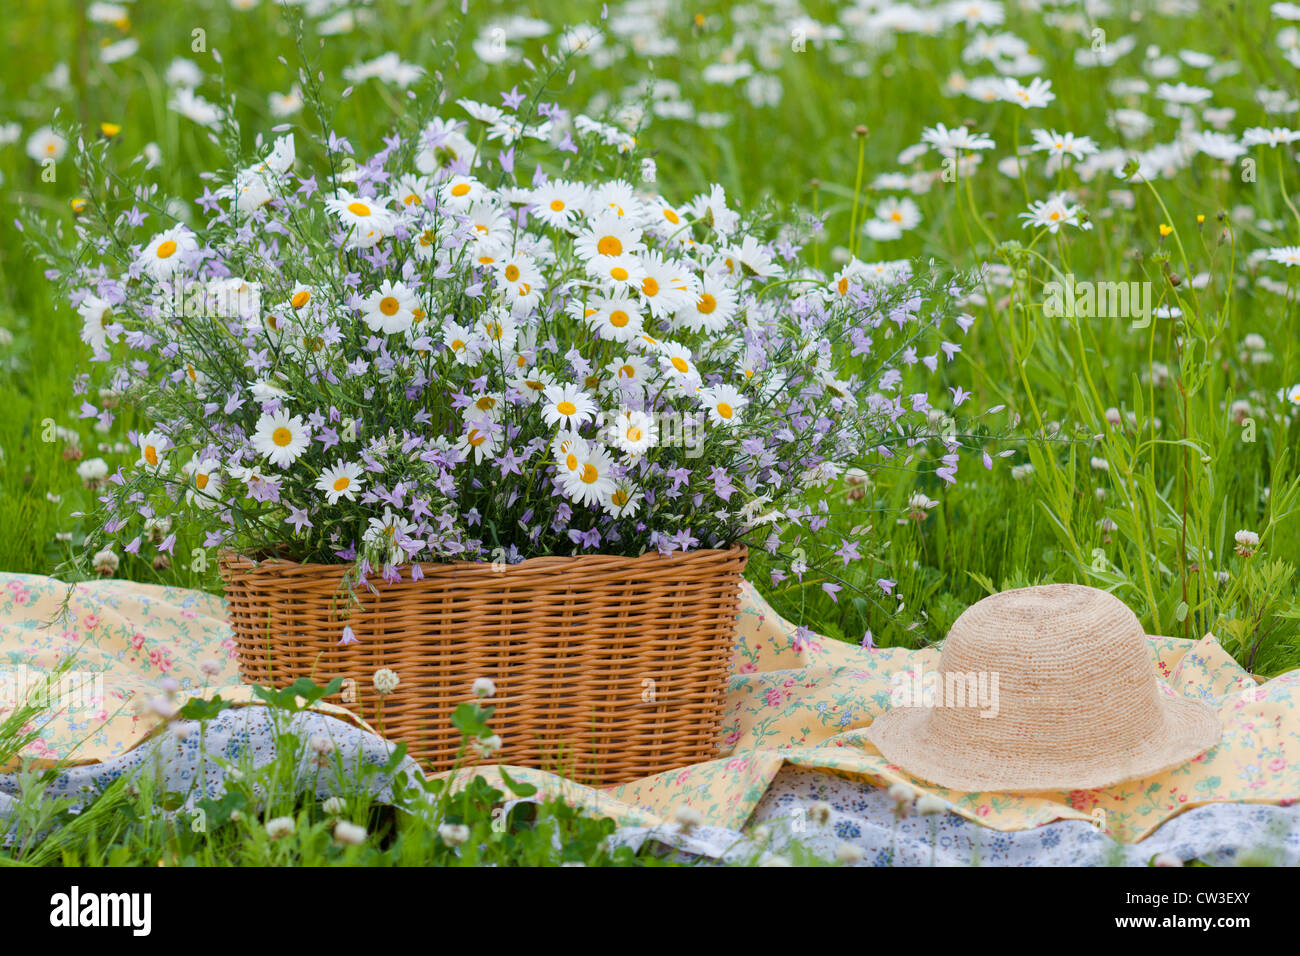 Basket full of marguerite and straw hat Stock Photo